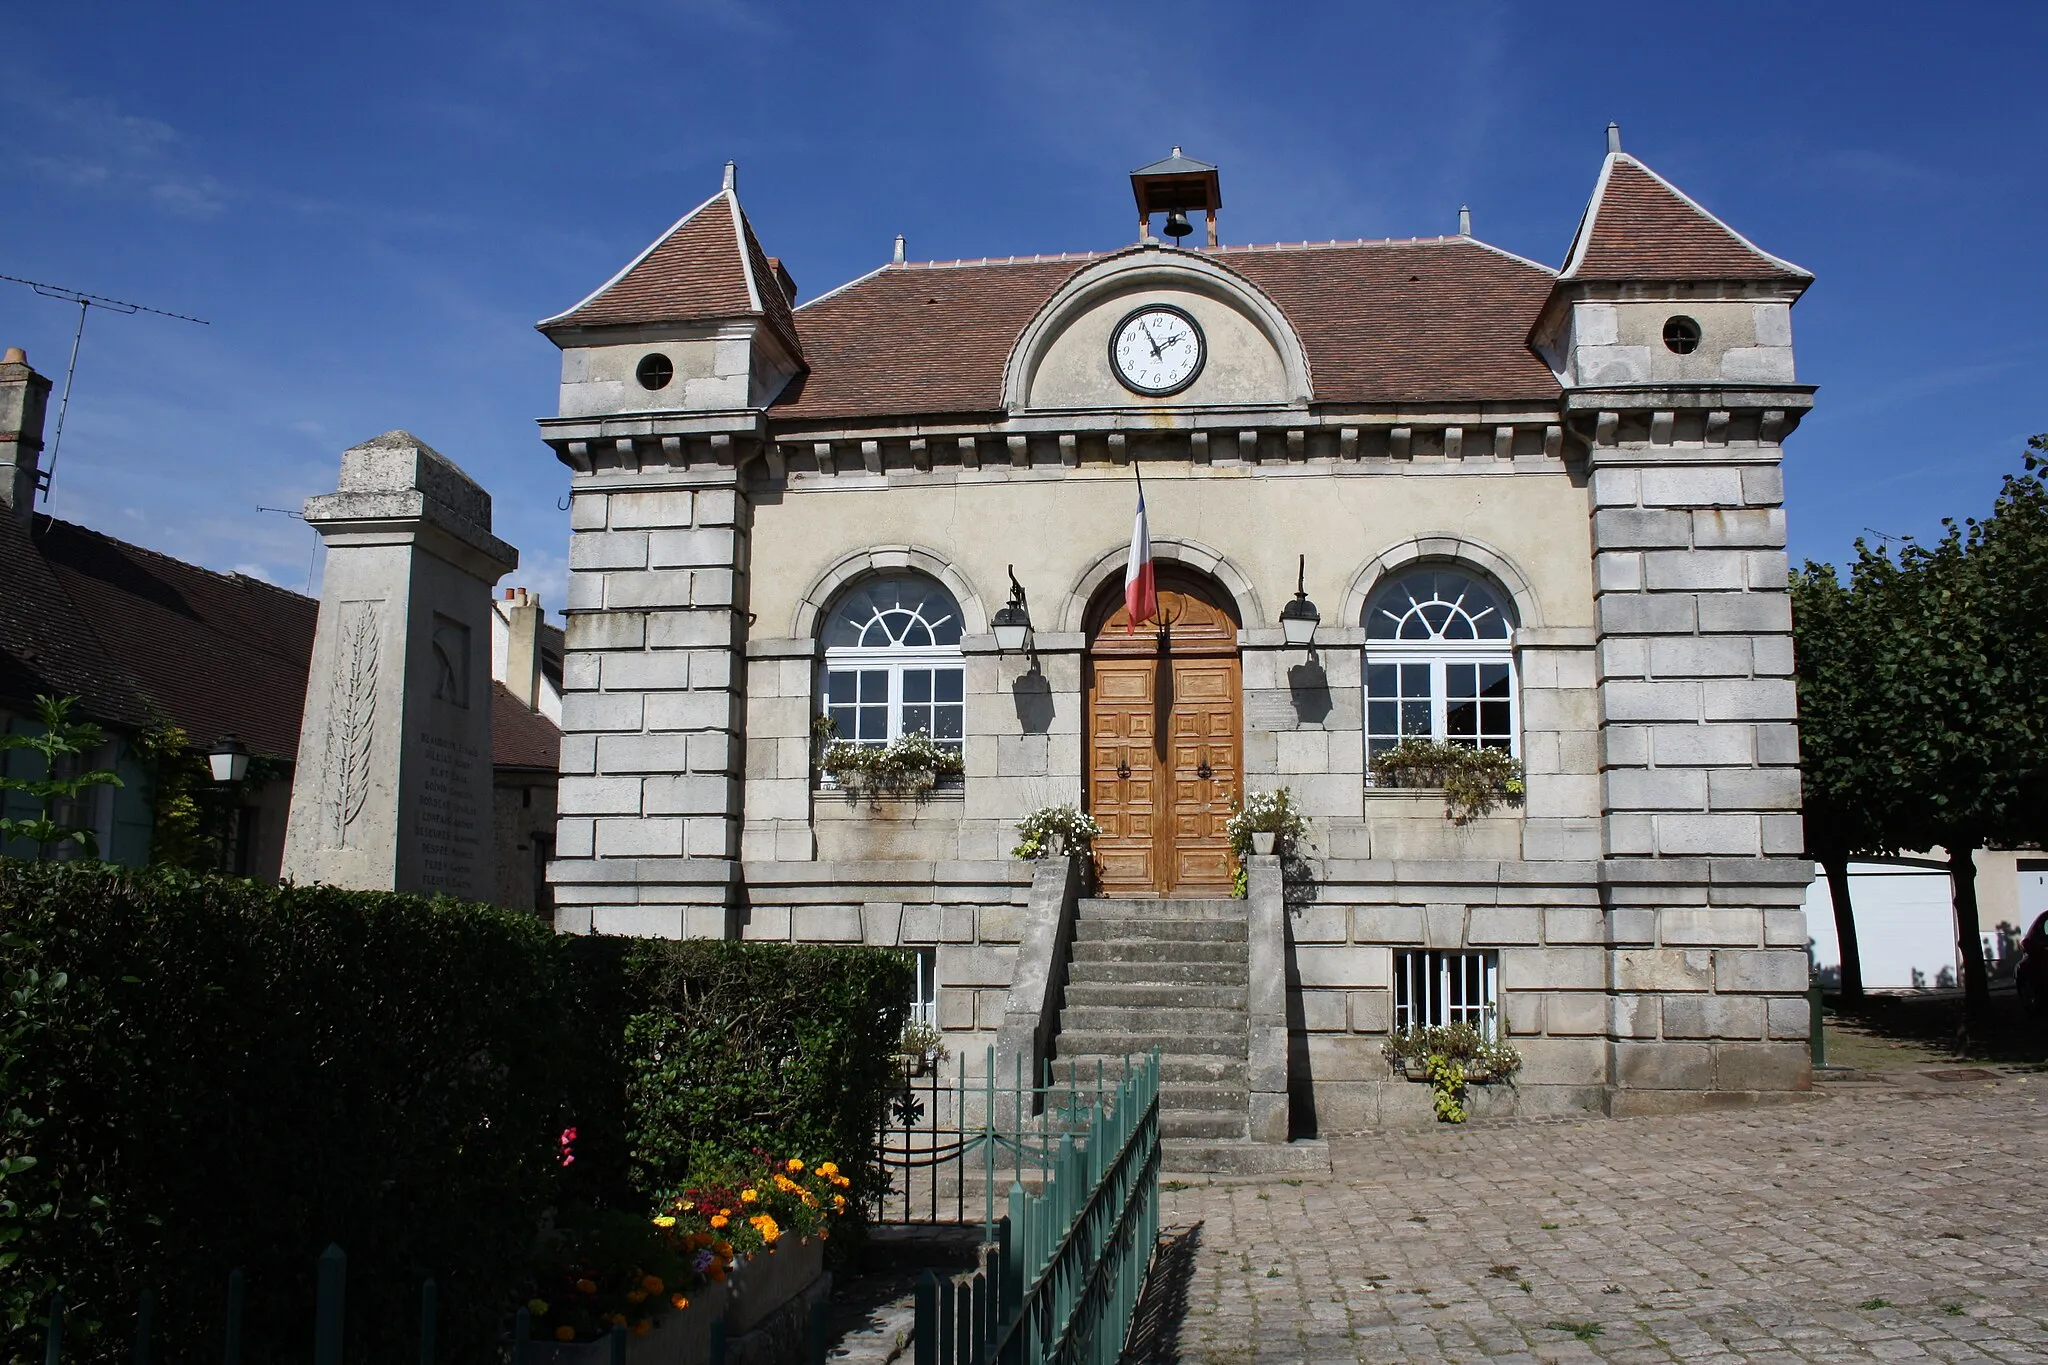 Photo showing: Town hall (Old bailliage) of Rochefort-en-Yvelines, France.